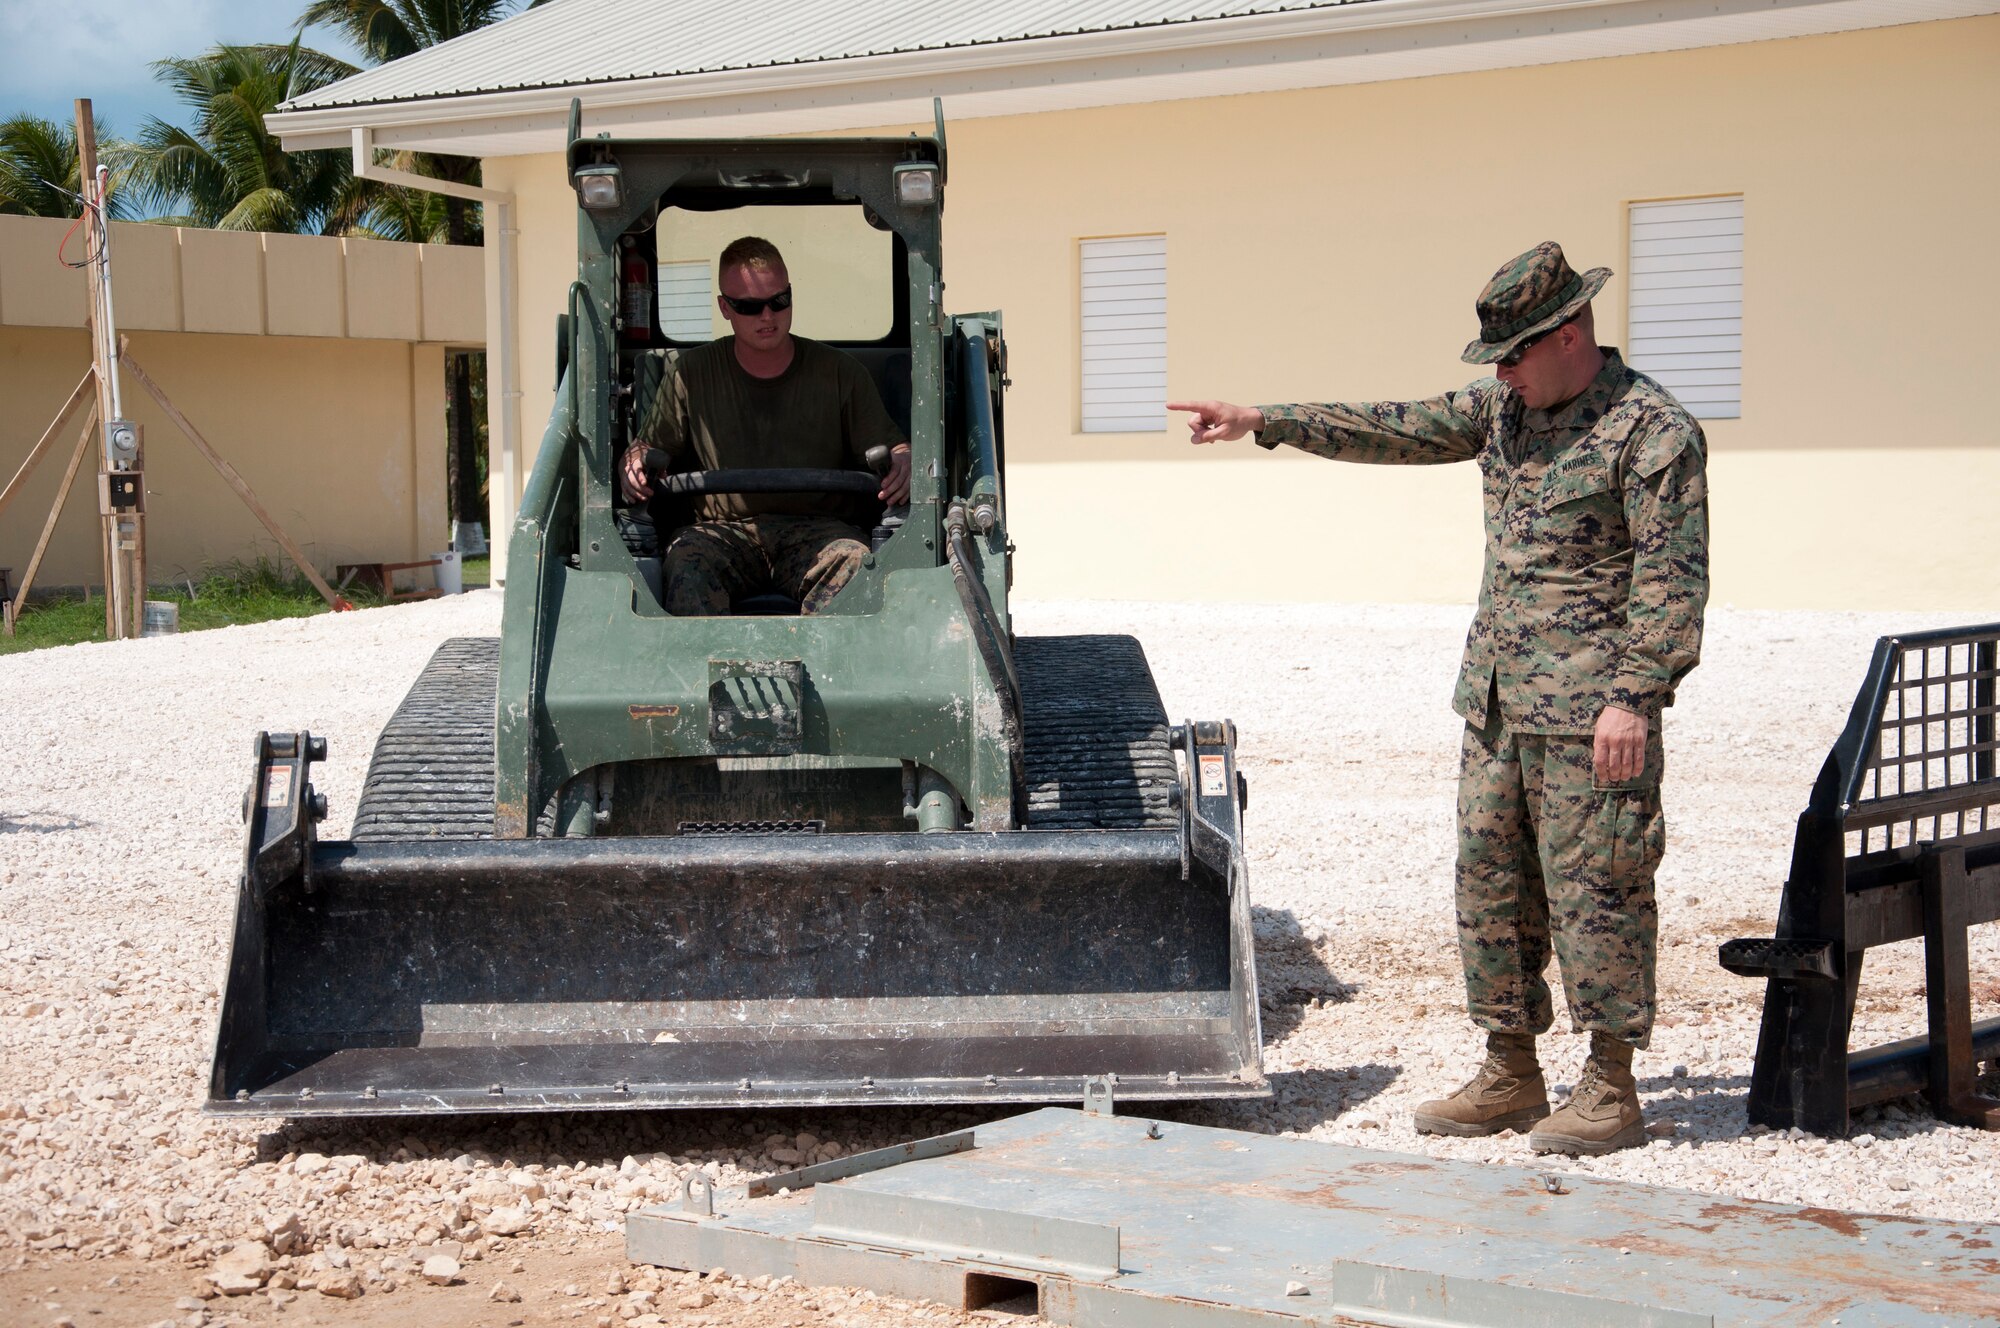 U.S. Marine Corps Gunnery Sgt. Robert Kendrick, Marine Wing Support Squadron 471, right, directs U.S. Marine Corps Lance Cpl. Dylan Secoy, Marine Wing Support Squadron 472, during the clean-up phase of construction at the Edward P. Yorke school construction site May 28, 2014, in Belize City, Belize. Marines from various Marine Wing Support Squadrons under the 4th Marine Aircraft Wing worked with engineers from the Belize Defence Force, U.S. Air Force and U.S. Army for nearly 40 working days to build two additional classrooms for the school as part of New Horizons Belize 2014. New Horizons is a multinational exercise that offers training and advancement opportunities in the civil engineering and medical fields. The mainly Marine-built addition to the E.P. Yorke school was officially handed over to the school principal June 4, 2014. (U.S. Air Force photo by Tech. Sgt. Kali L. Gradishar/Released)